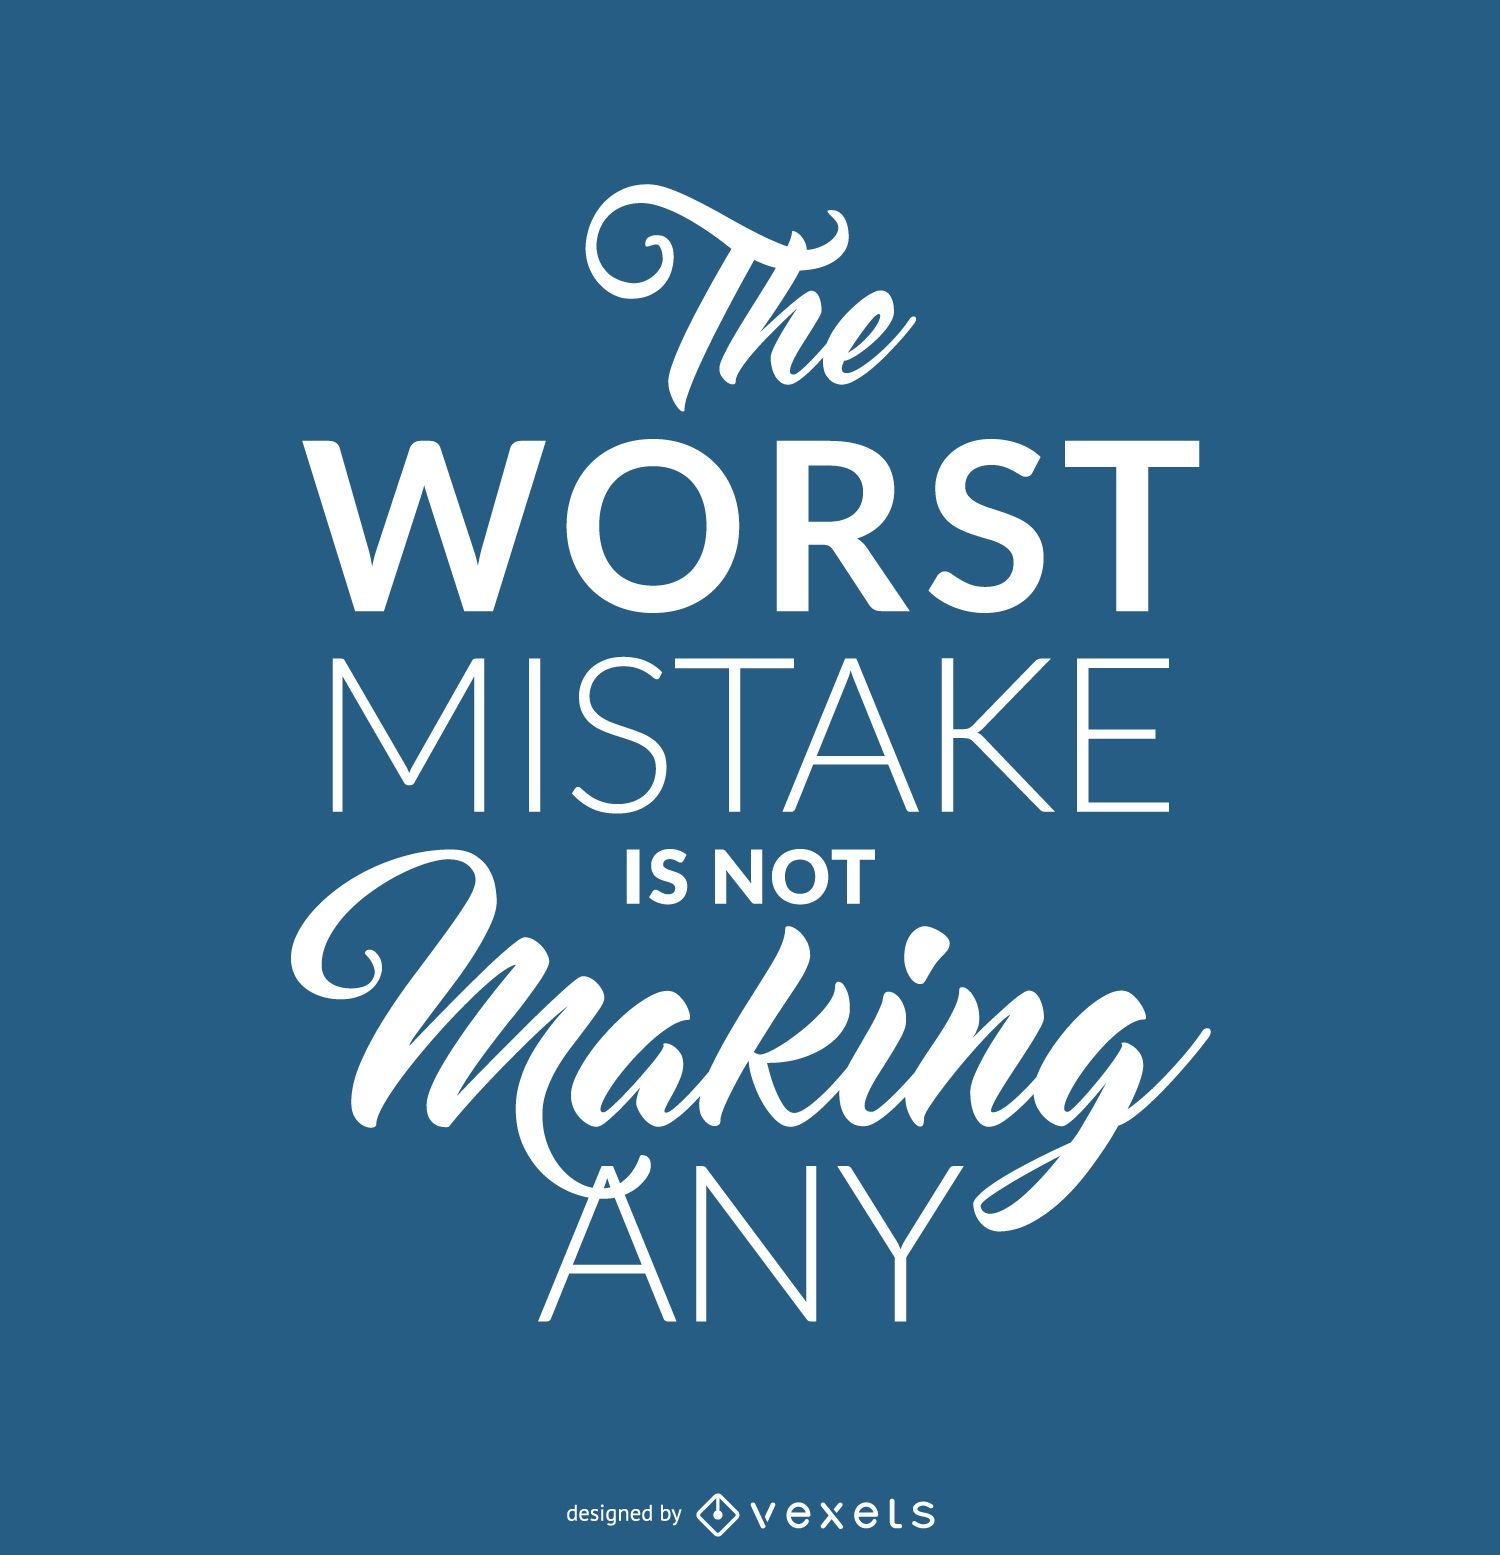 Hipster mistake quote poster